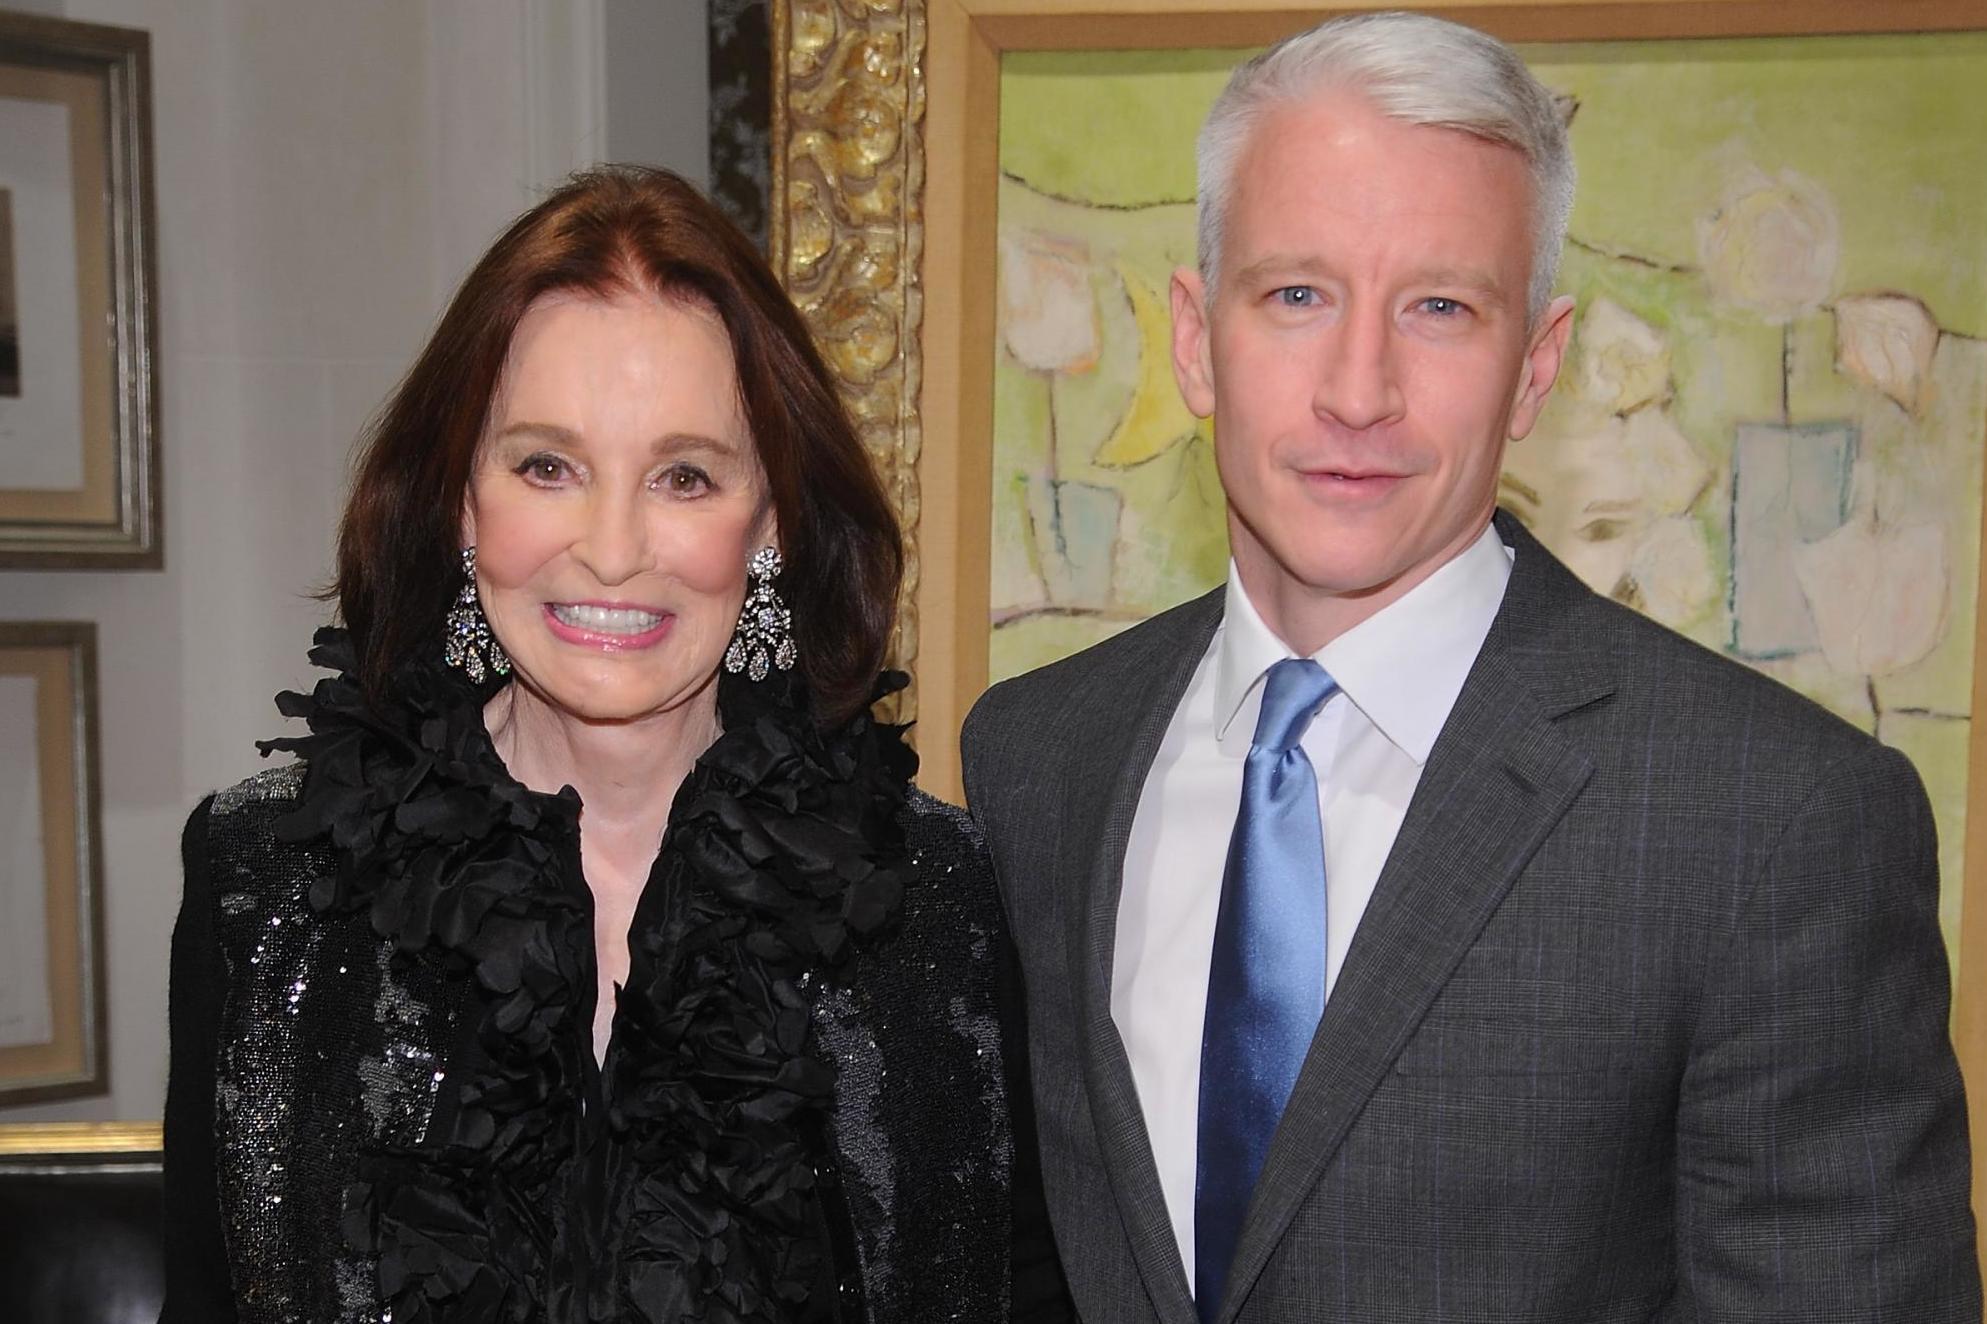 Anderson Cooper pays tribute to his late mother (Getty)